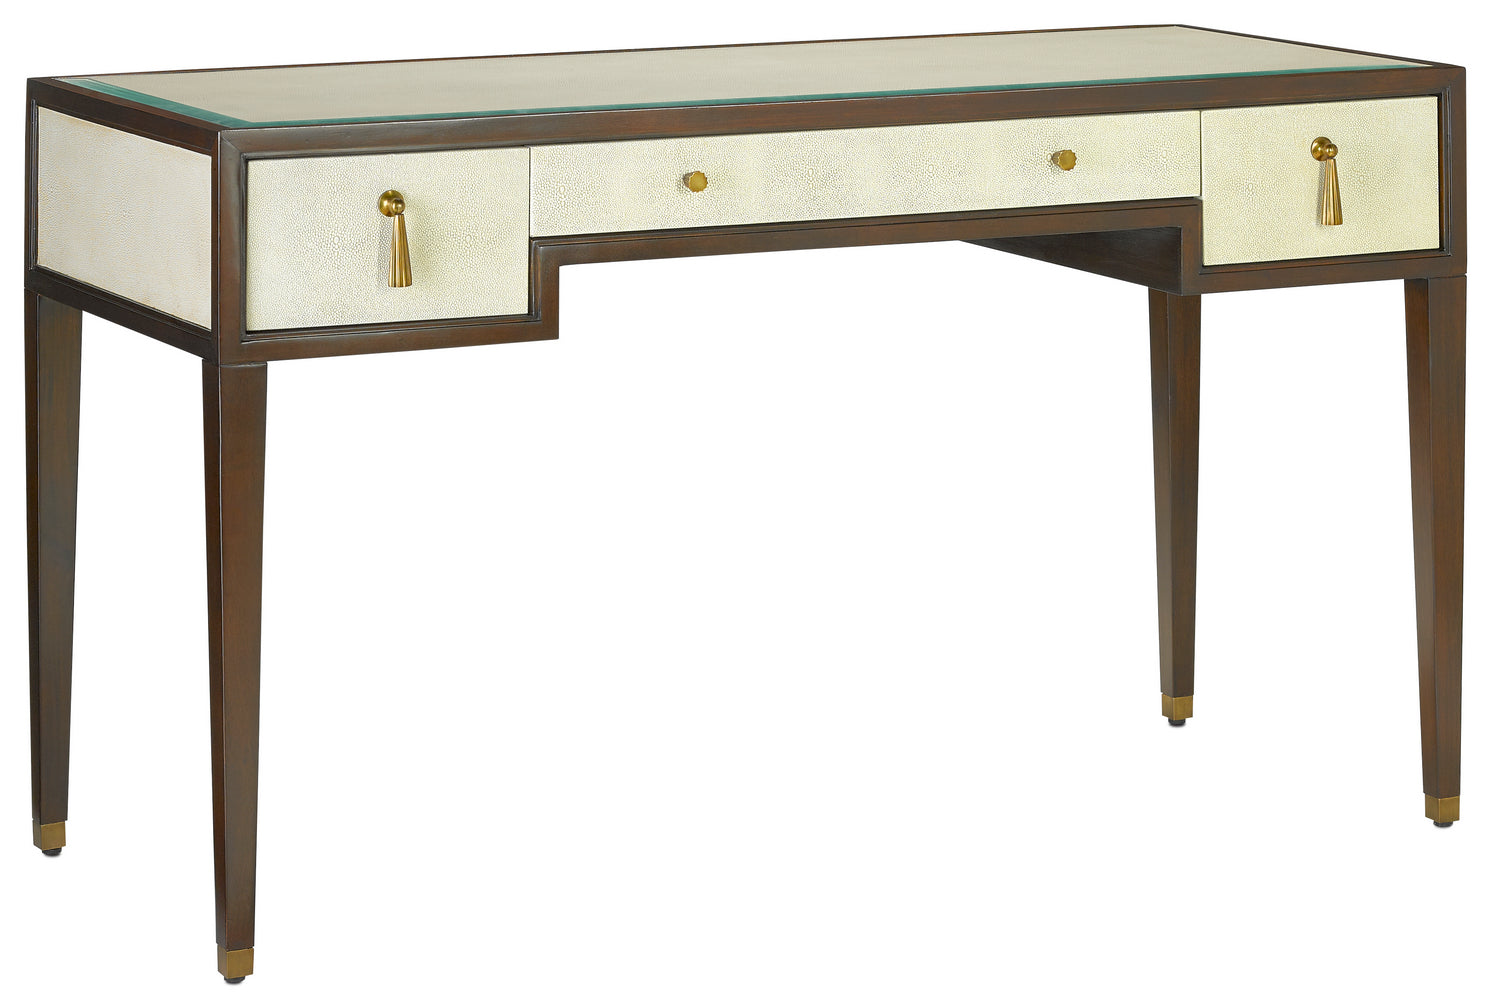 Desk from the Evie collection in Ivory/Dark Walnut/Brass/Clear finish